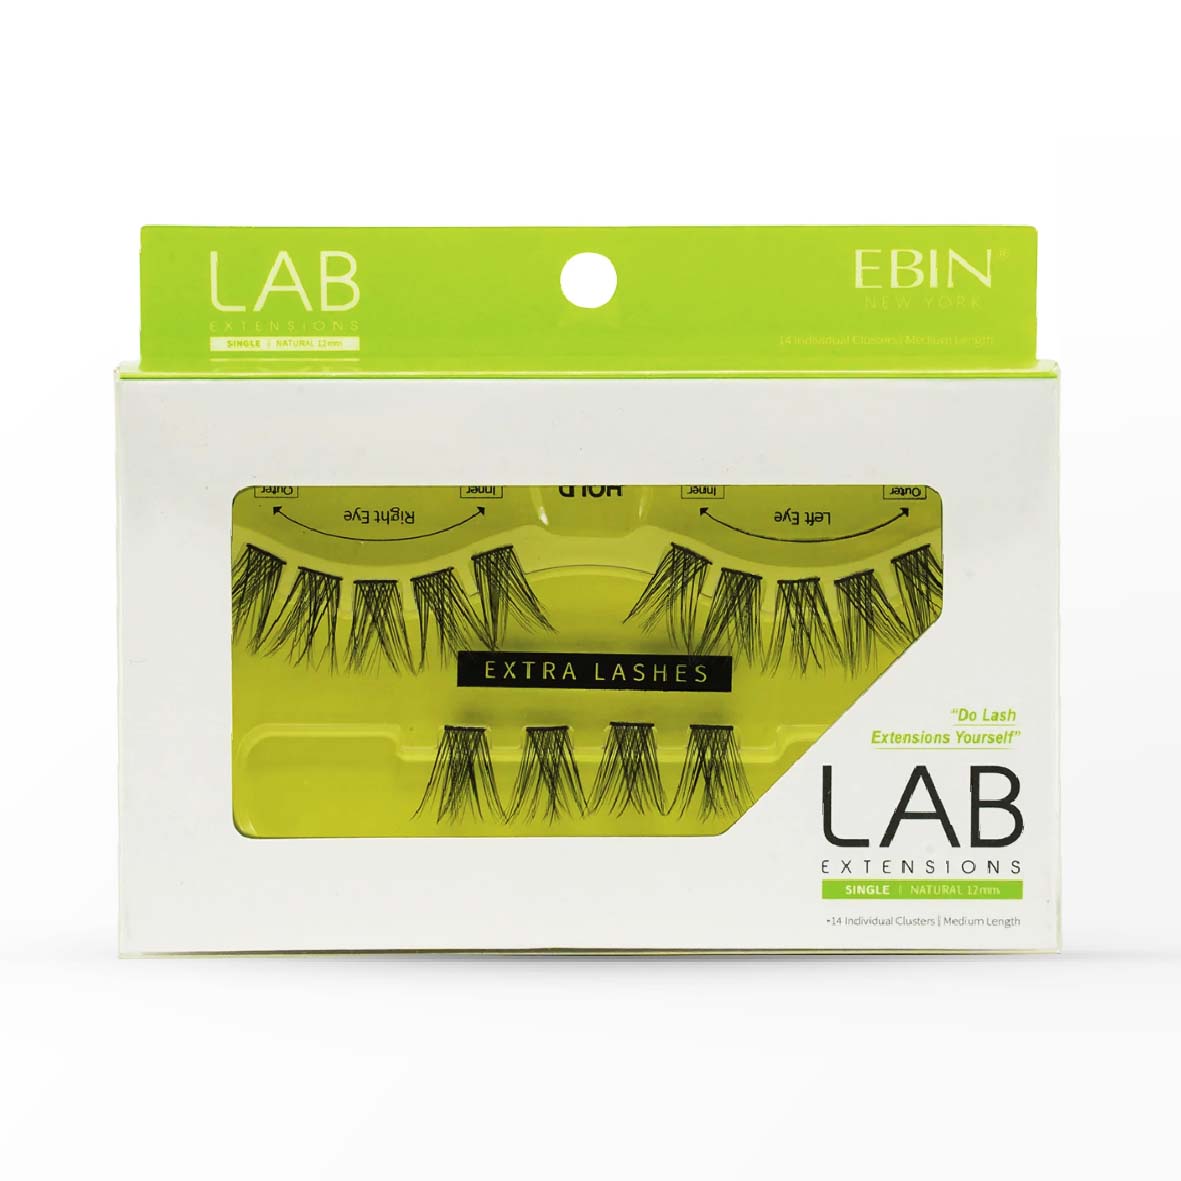 EBIN NEW YORK LAB EXTENSIONS SINGLE INDIVIDUAL LASHES 14MM